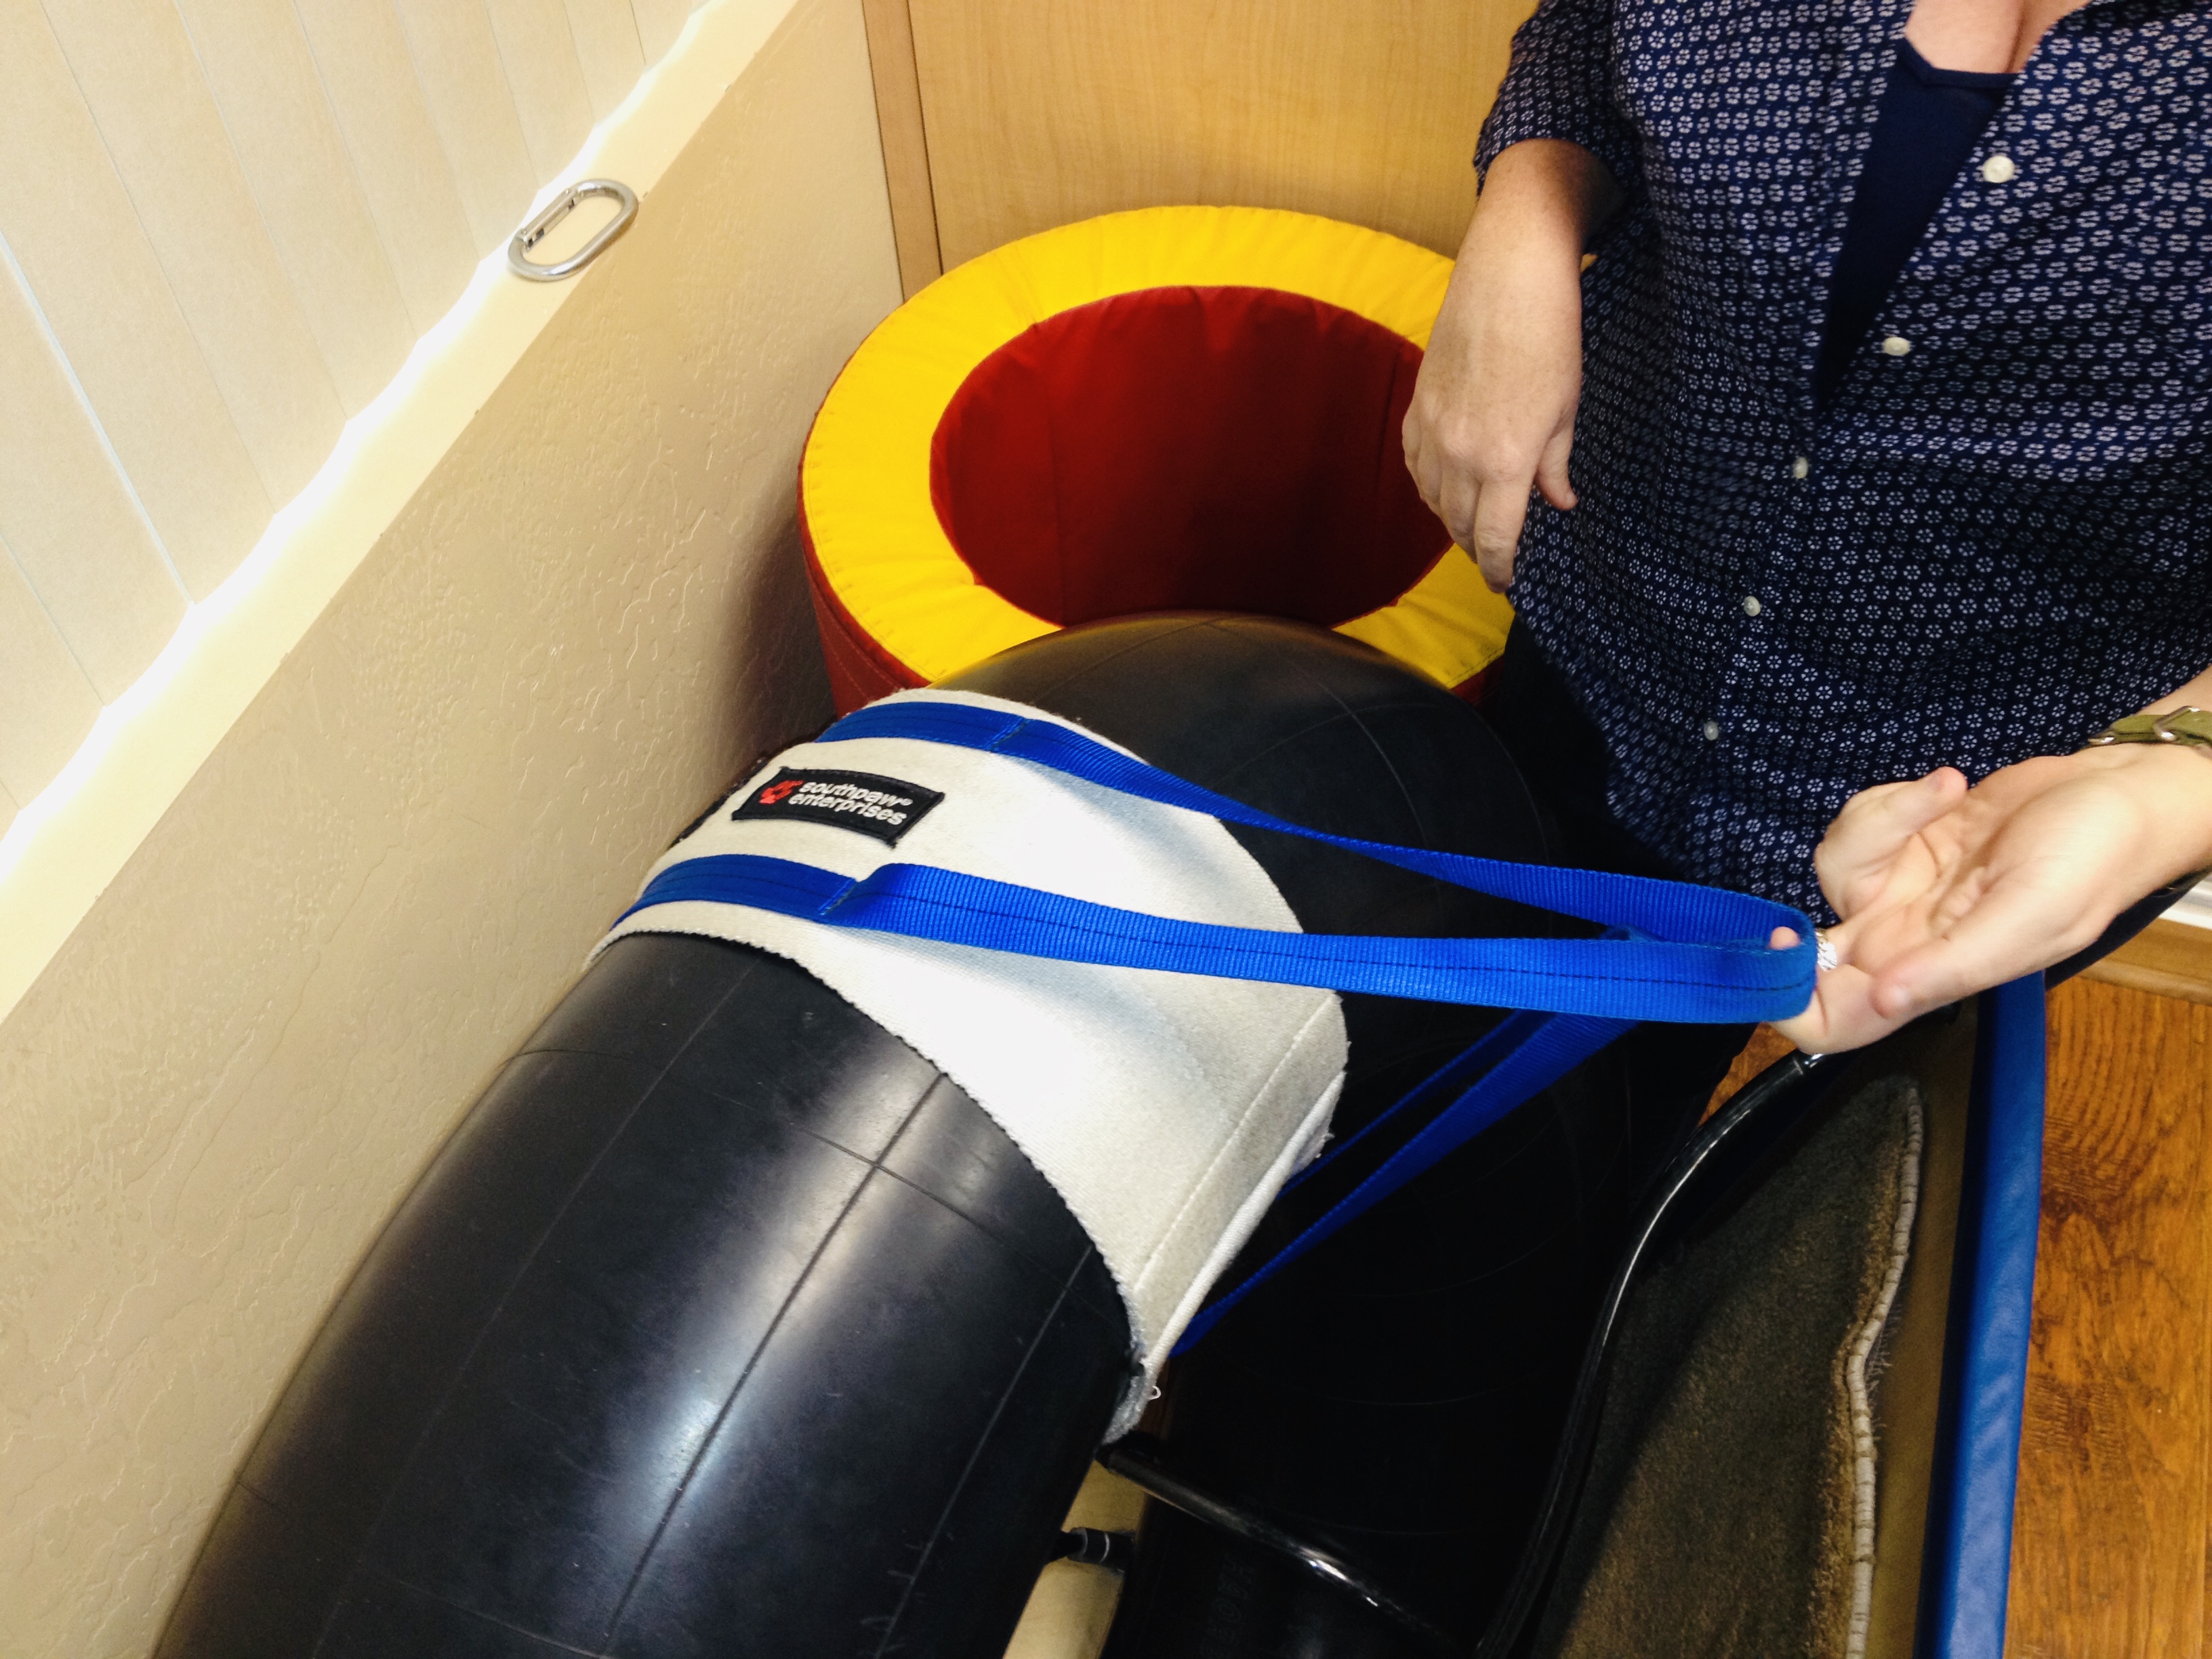 Putting away rubber tube tire from sensory equipment